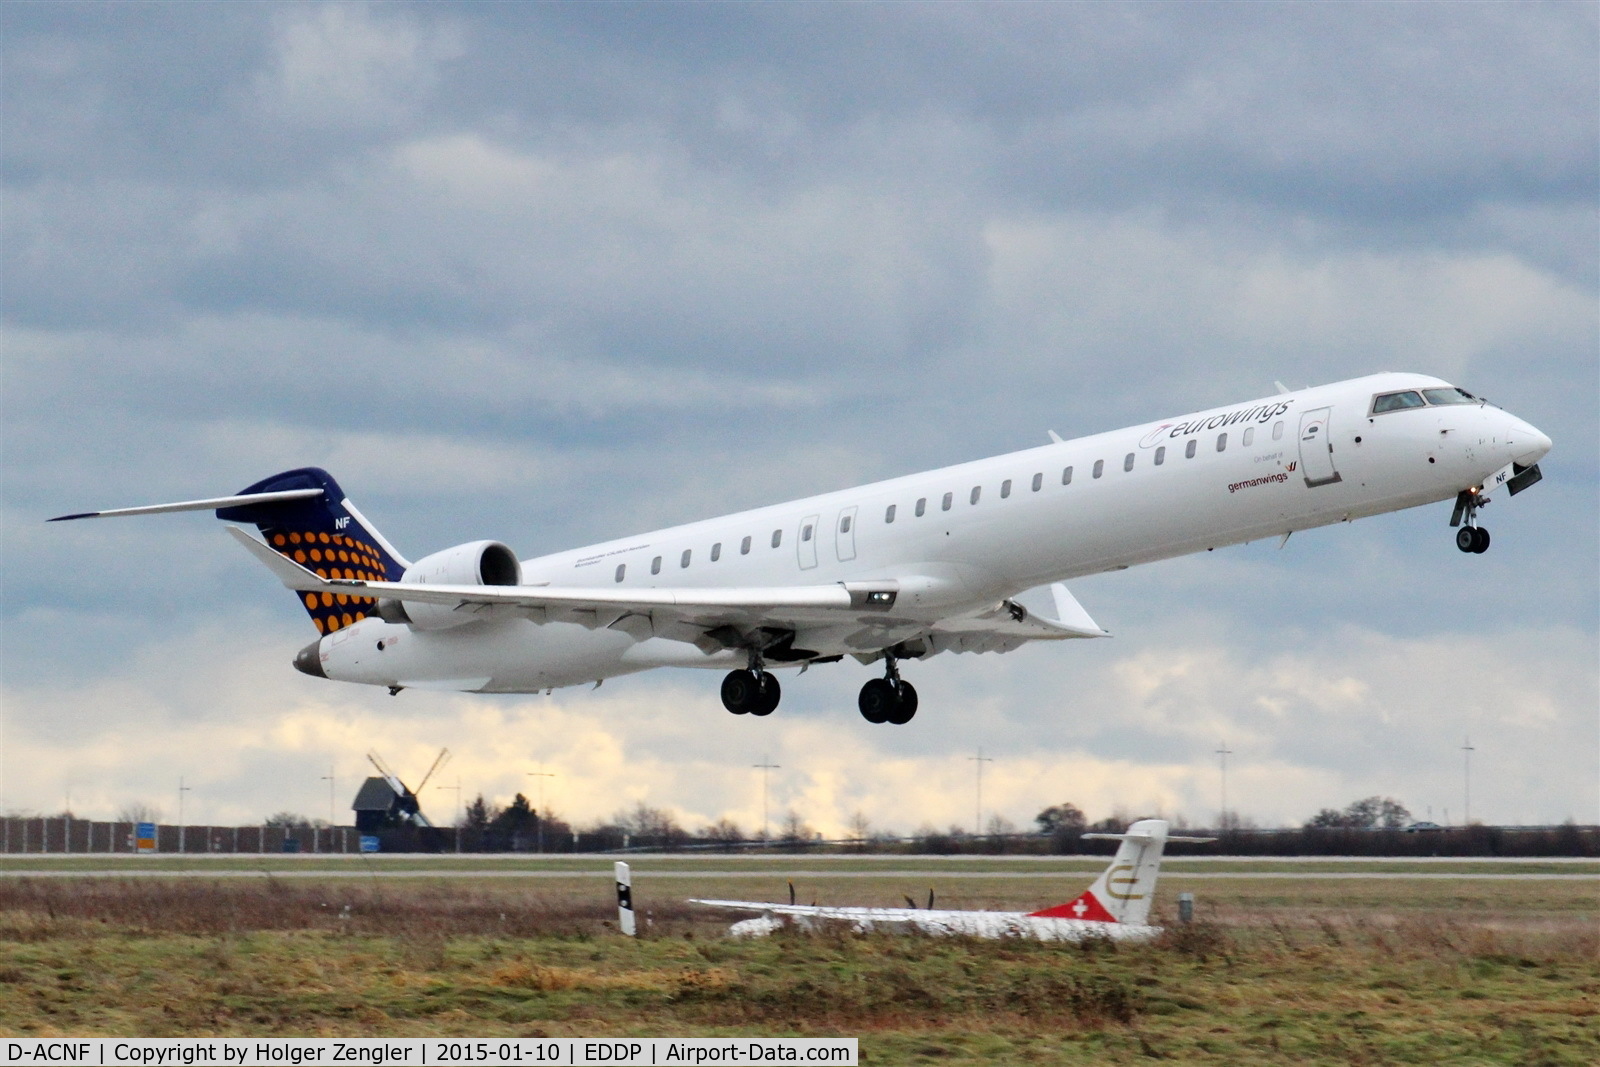 D-ACNF, 2009 Bombardier CRJ-900 (CL-600-2D24) C/N 15243, Departure to DUS on rwy 24R....